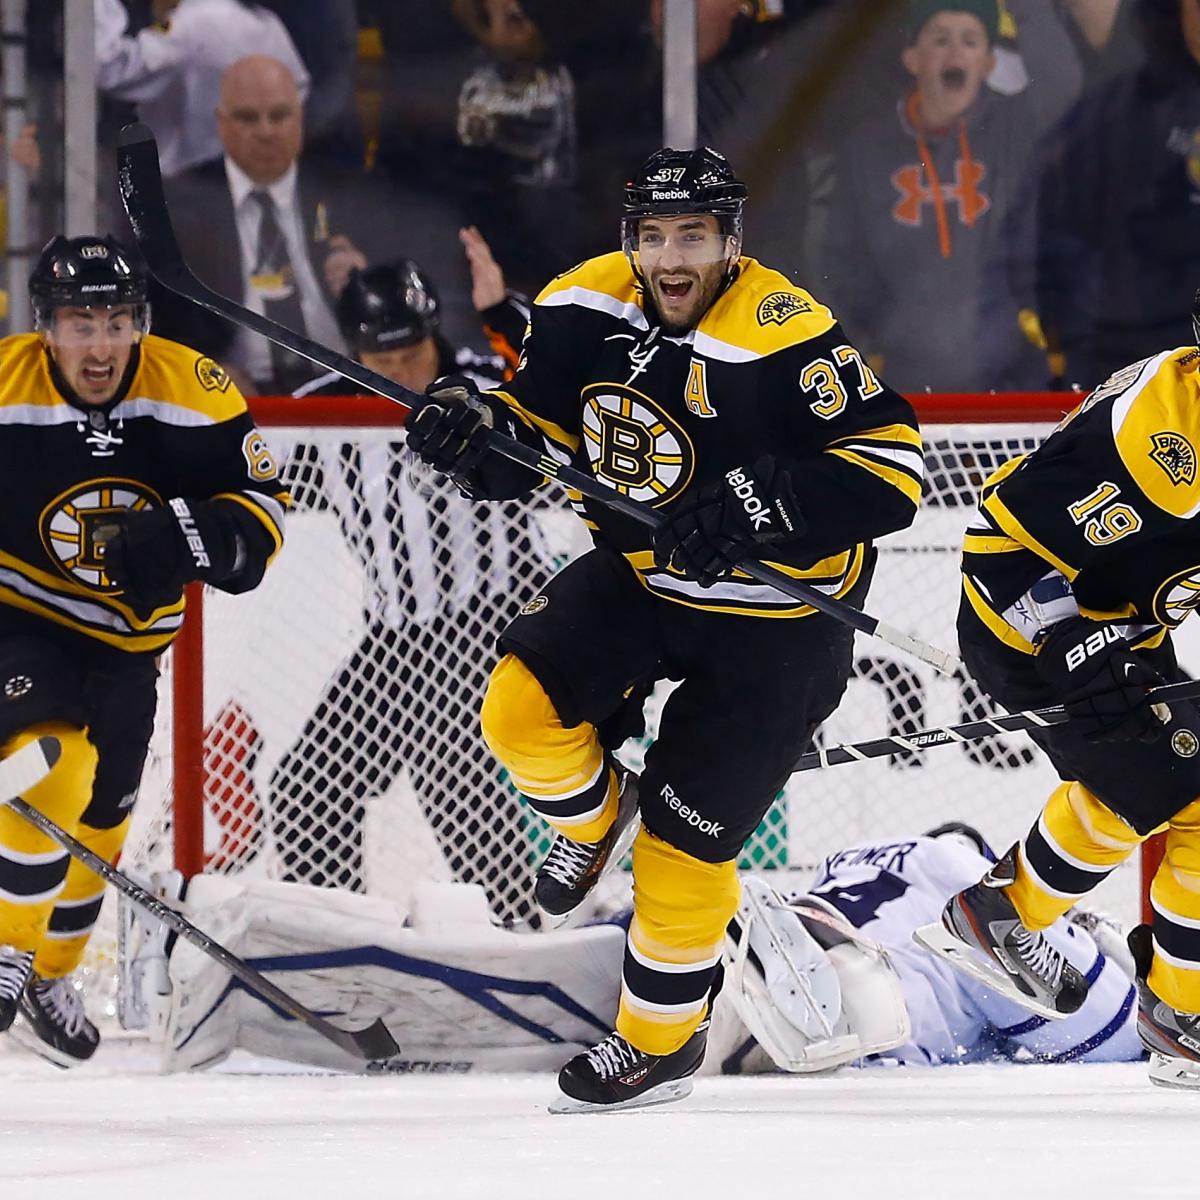 Will Rangers vs. Bruins Playoff Series Live Up to Postseason Rivalry of